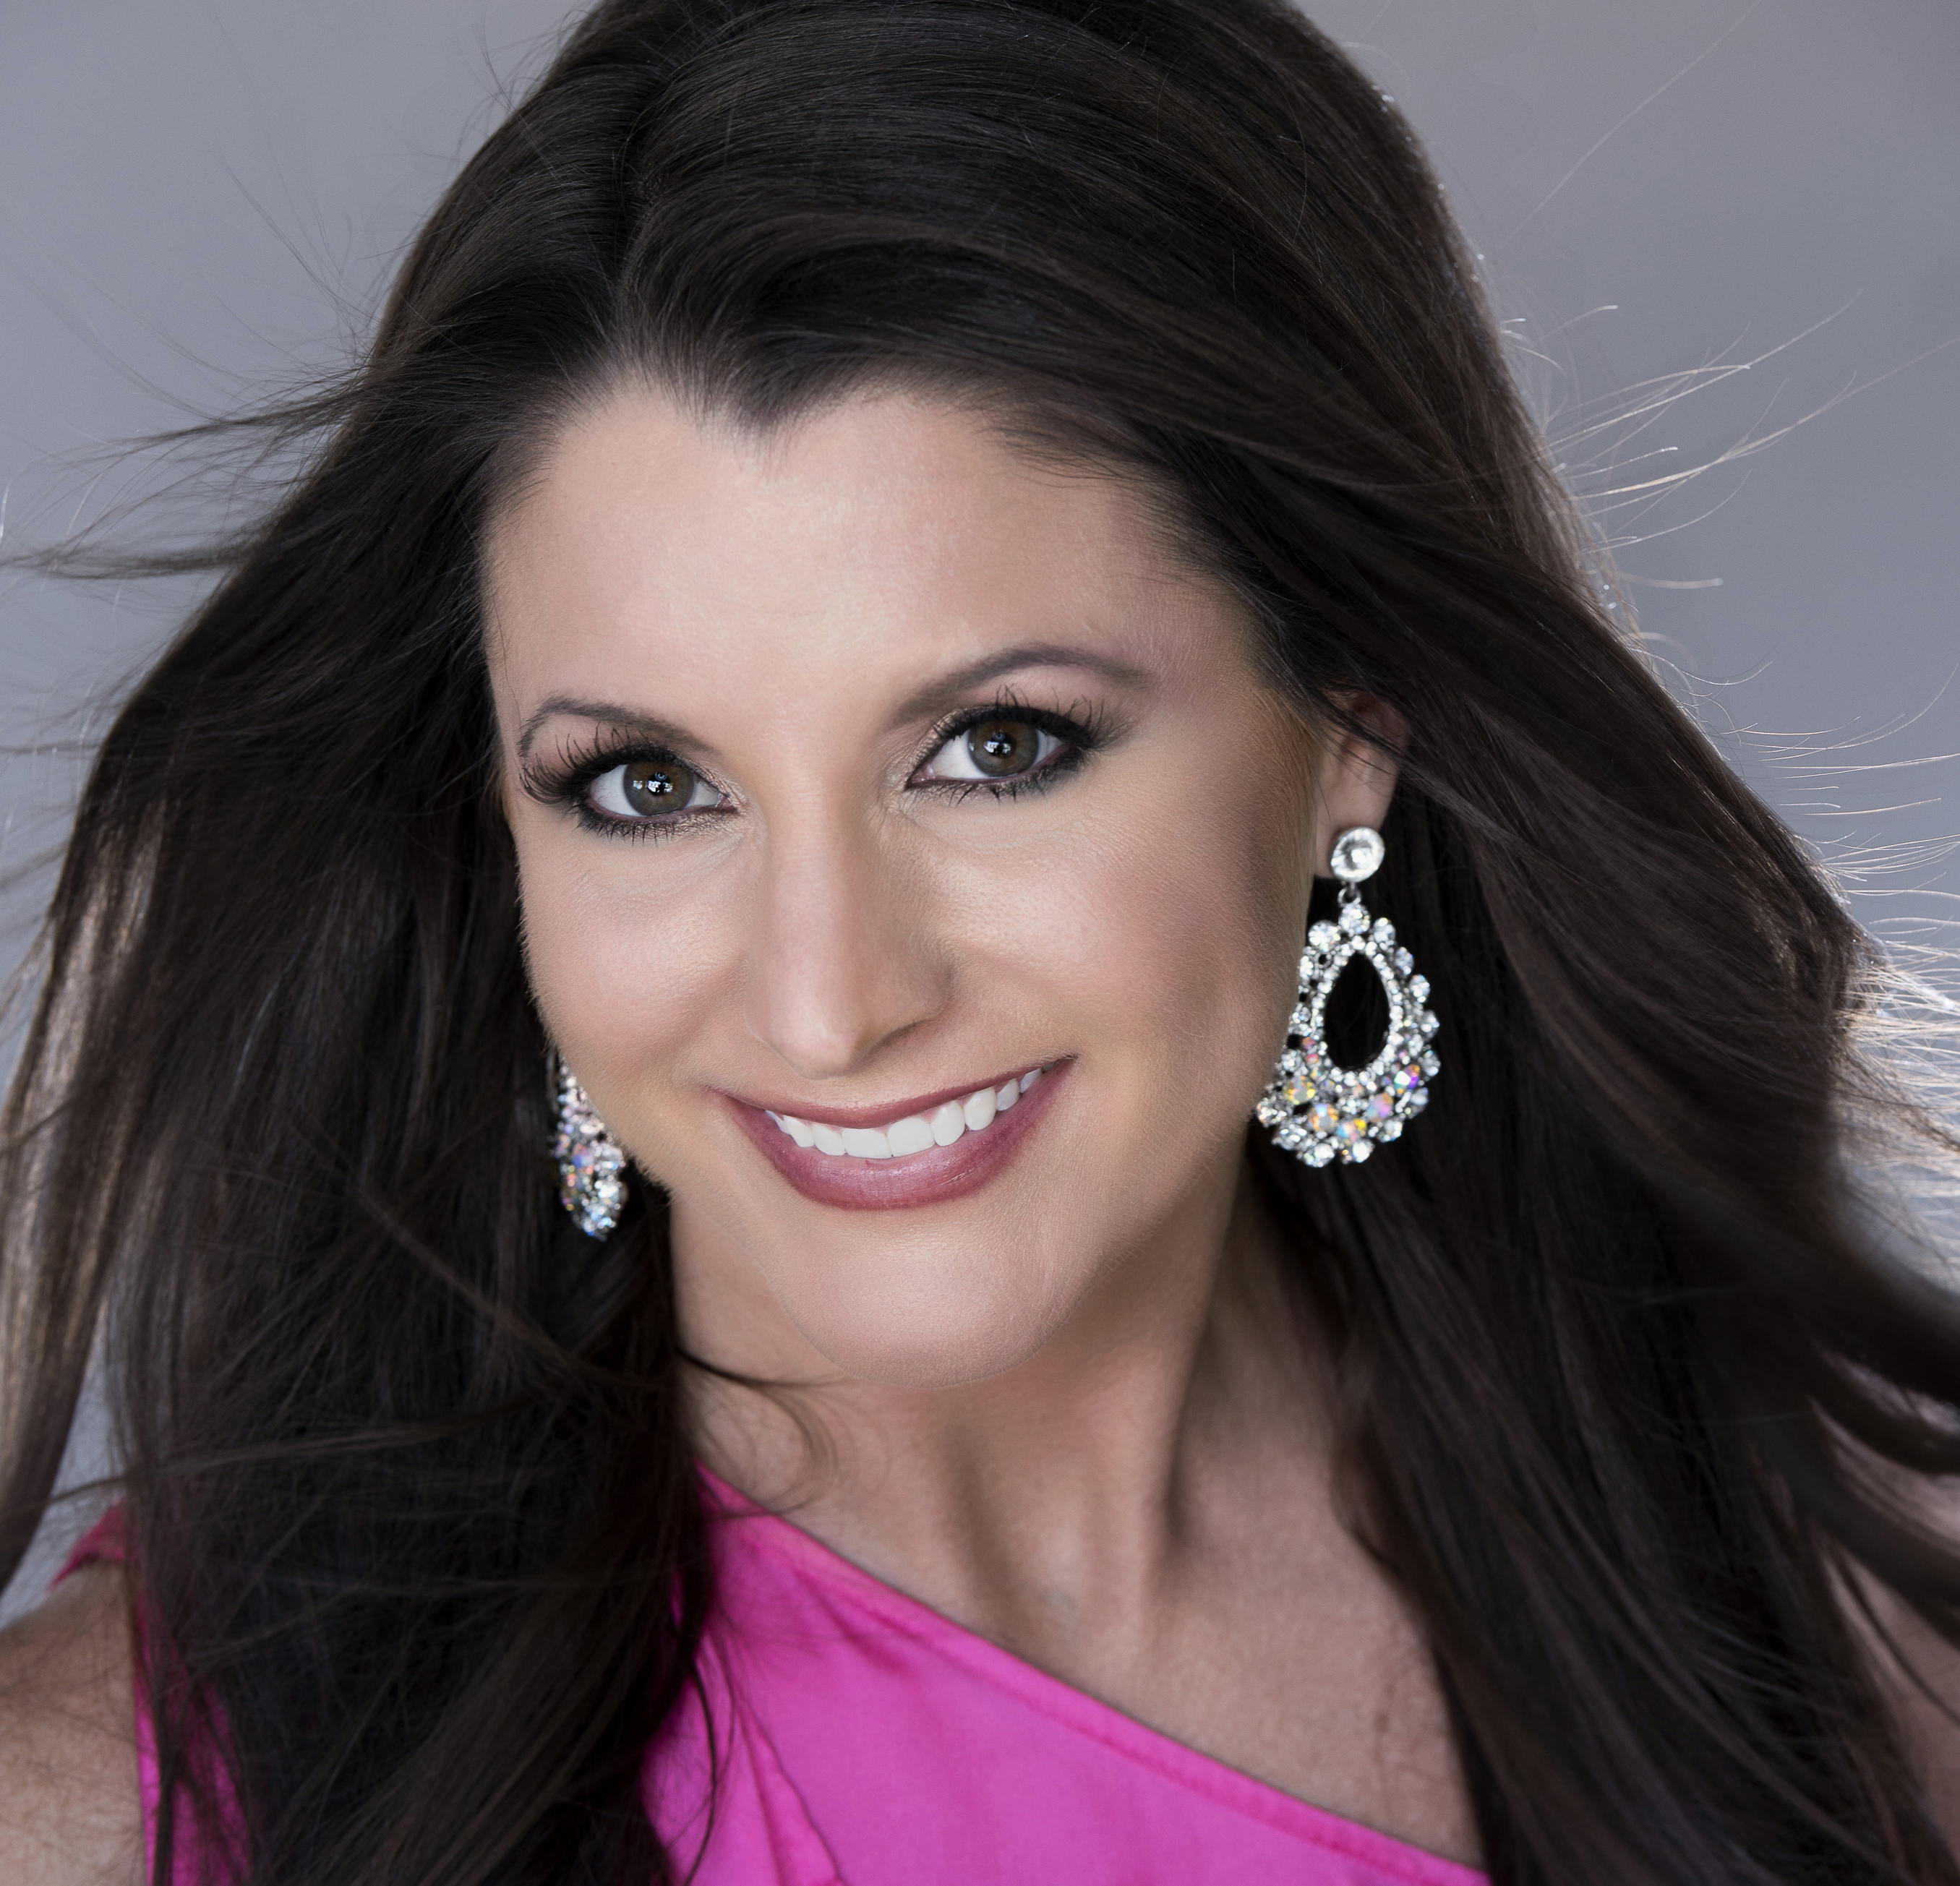 Trussville native is Mrs. Alabama petite, will compete nationally